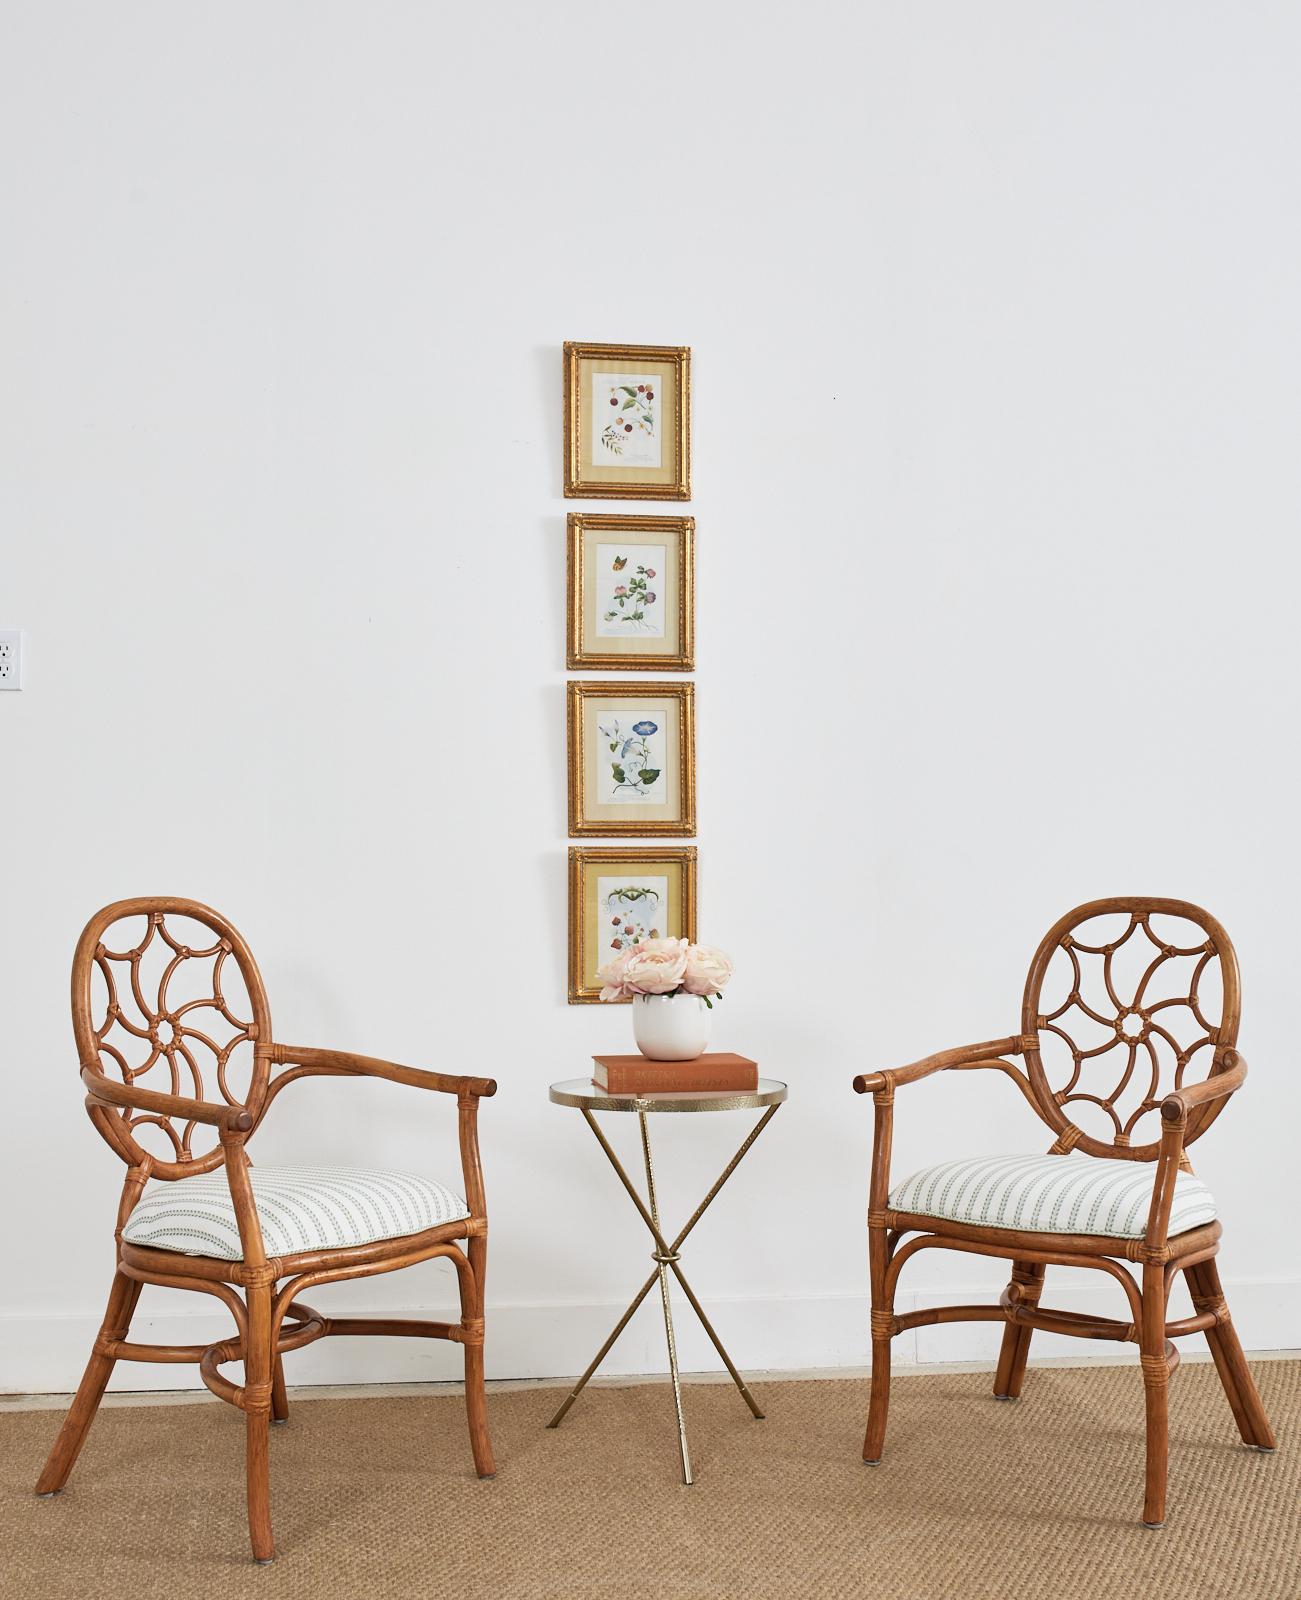 Distinctive pair of organic modern rattan dining armchairs crafted from rattan in the style and manner of McGuire. The chairs feature a round back with a wheel motif back splat. The rattan is lashed together with leather rawhide laces a la McGuire.